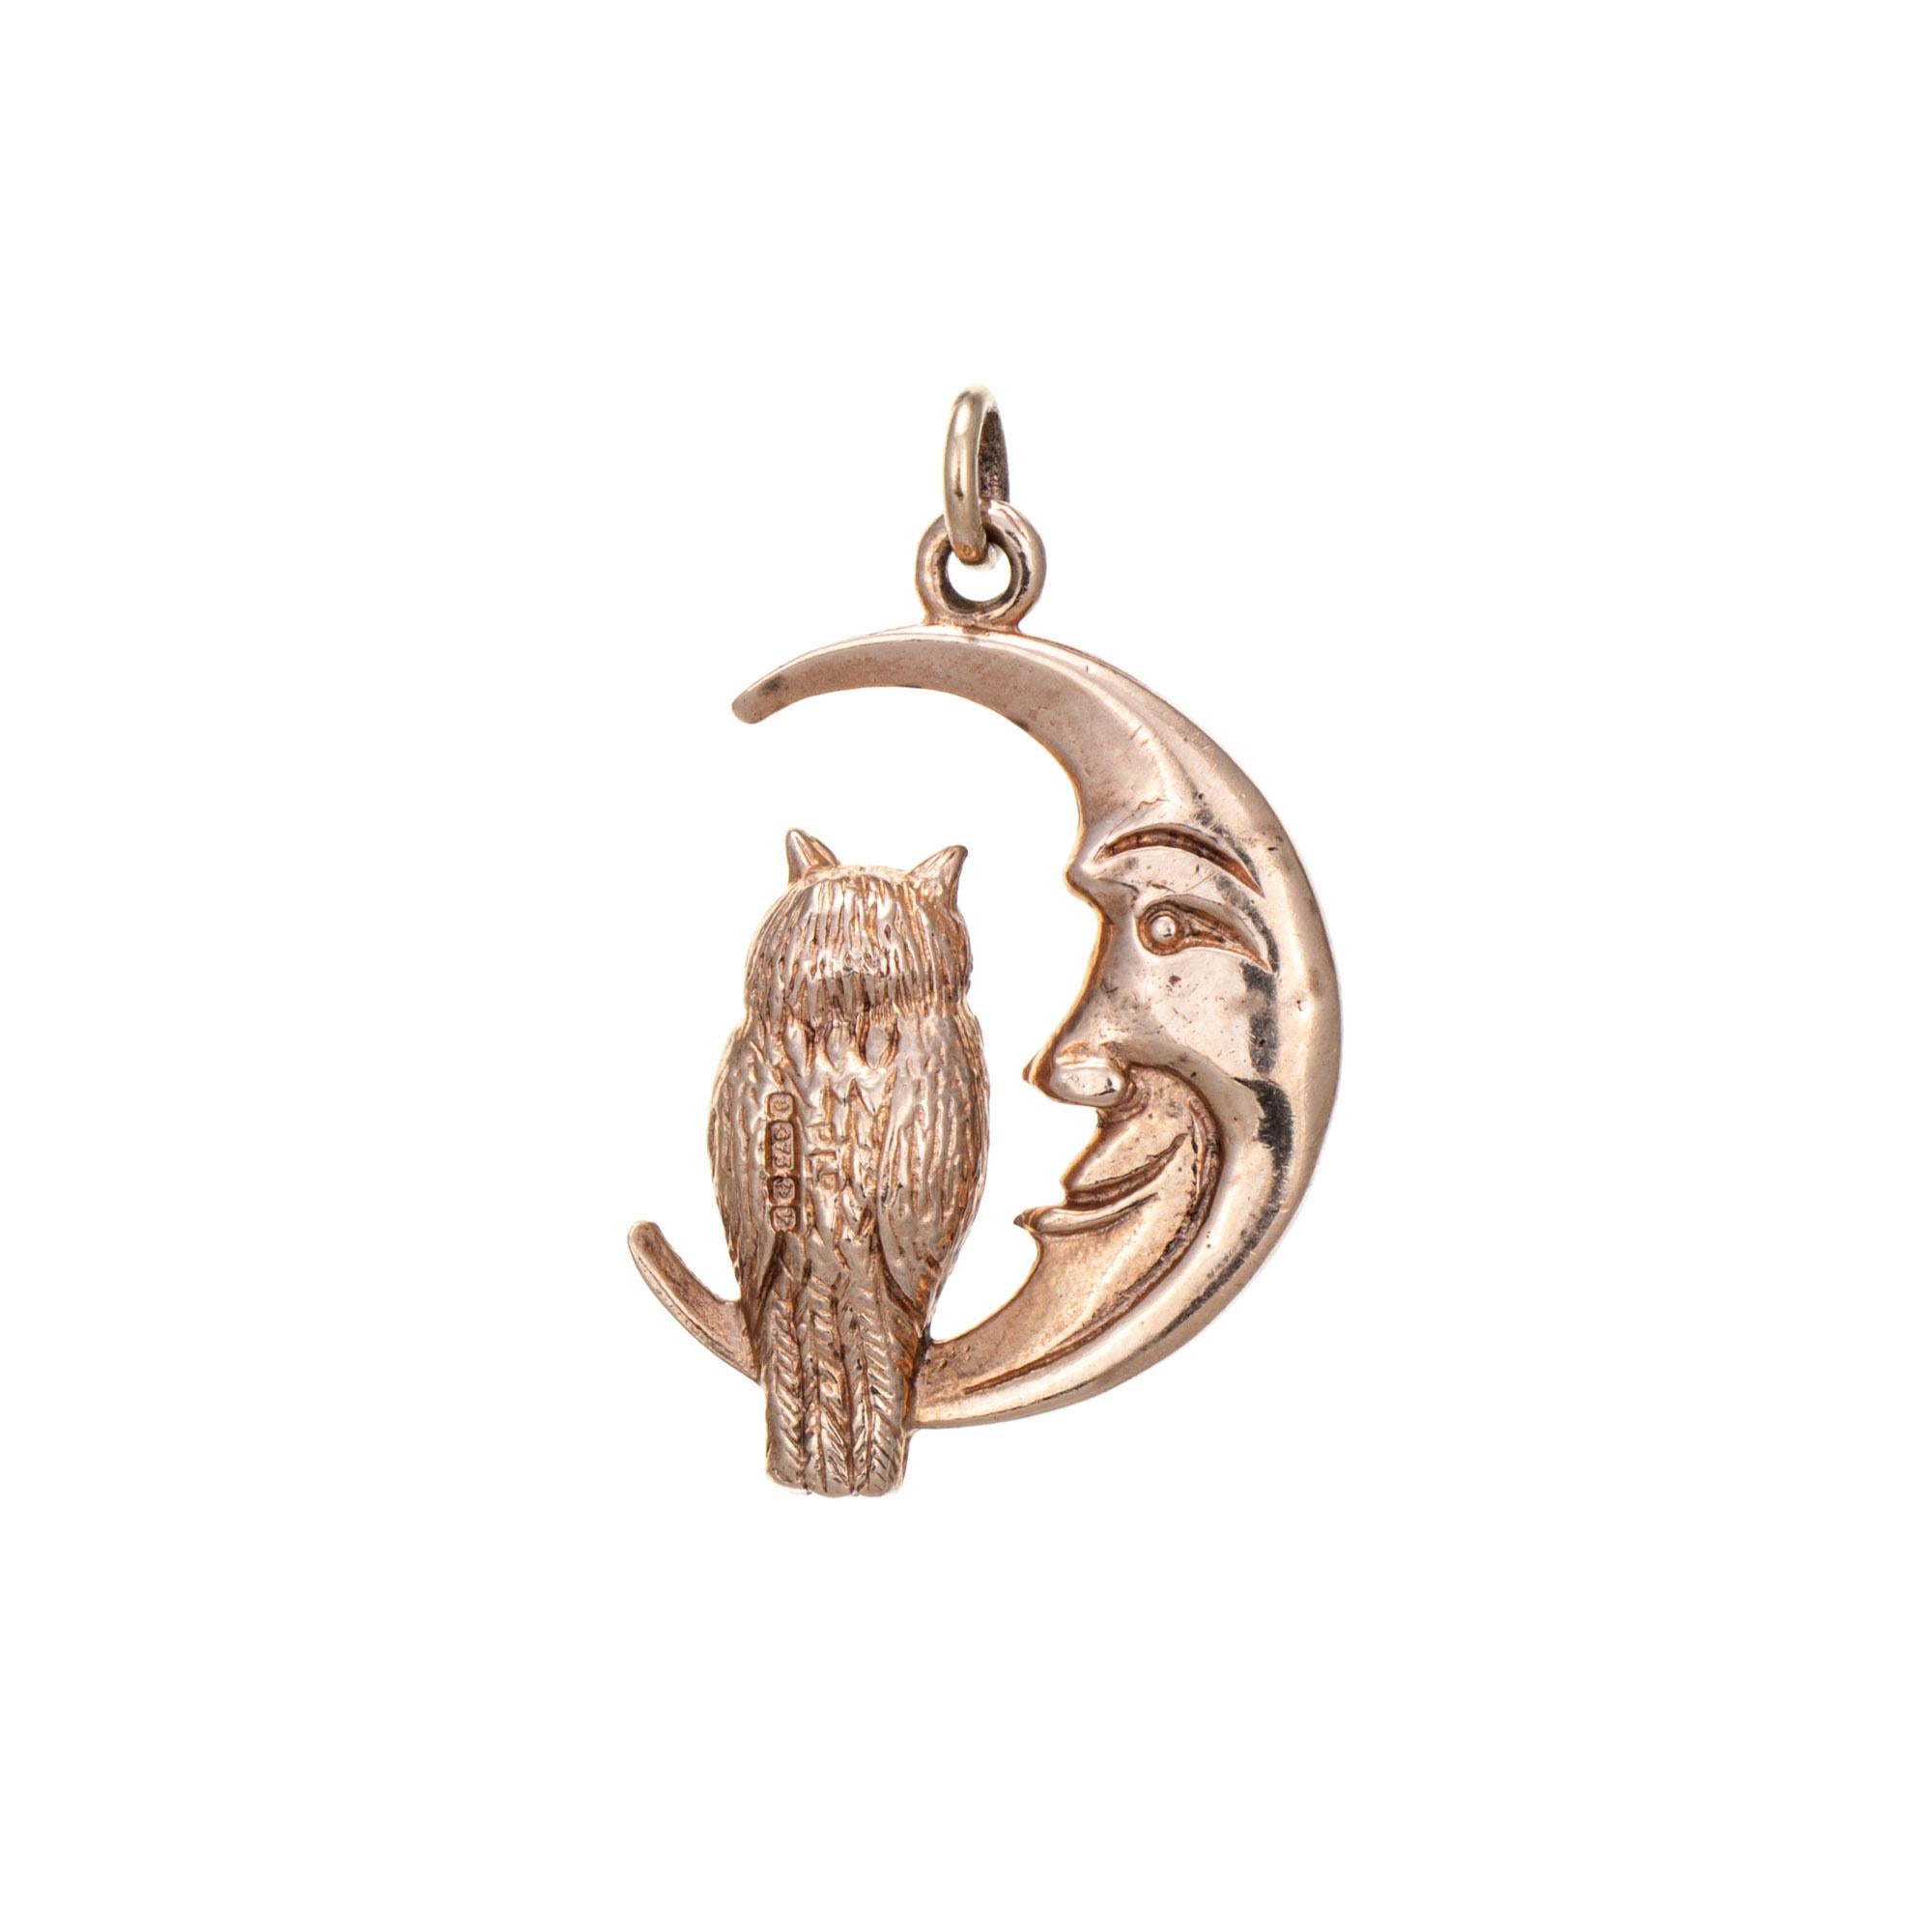 Finely detailed vintage crescent moon & owl charm crafted in 9k rose gold (circa 1960s to 1970s).  

Two lab rubies total an estimated 0.02 carats. 

The sweet charm highlights an owl perched on a crescent moon. Rendered in lifelike detail the piece